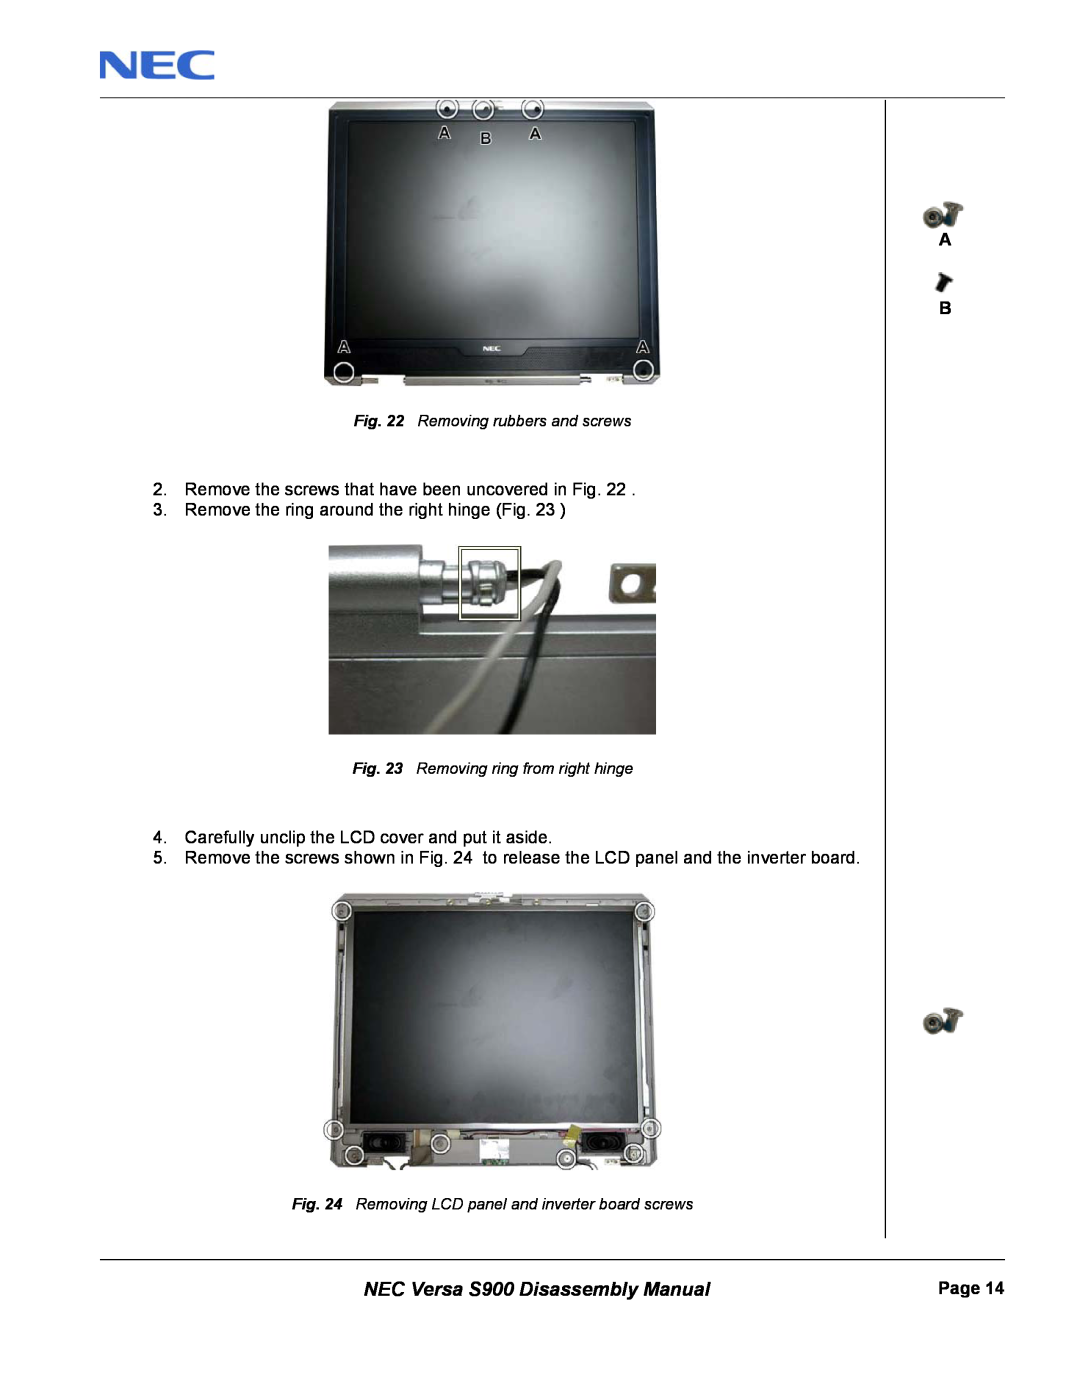 NEC NEC Versa S900 Disassembly Manual, Remove the ring around the right hinge Fig, Removing rubbers and screws, Page 